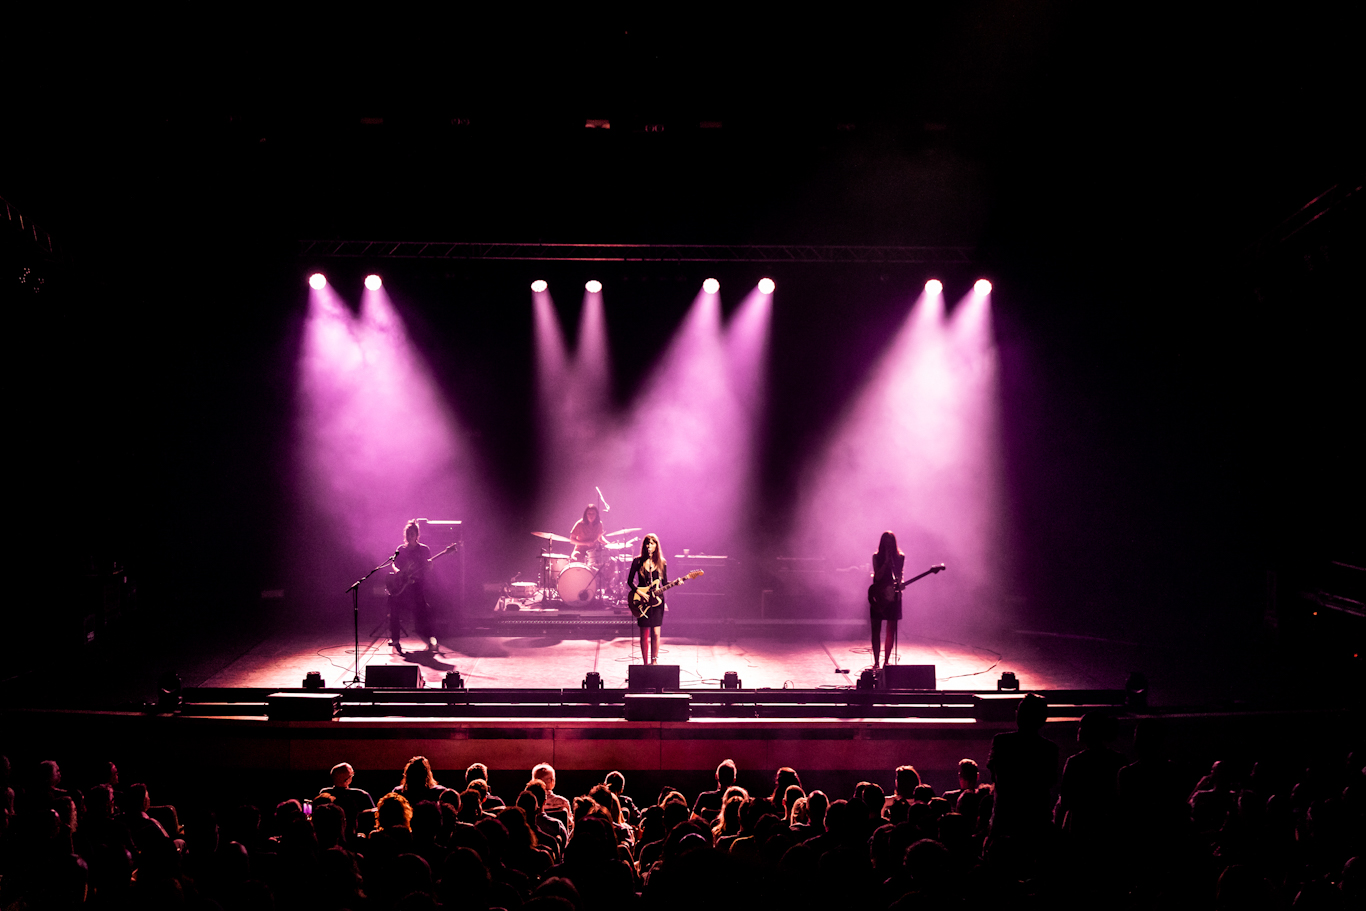 LIVE REVIEW: Warpaint at Royal Festival Hall